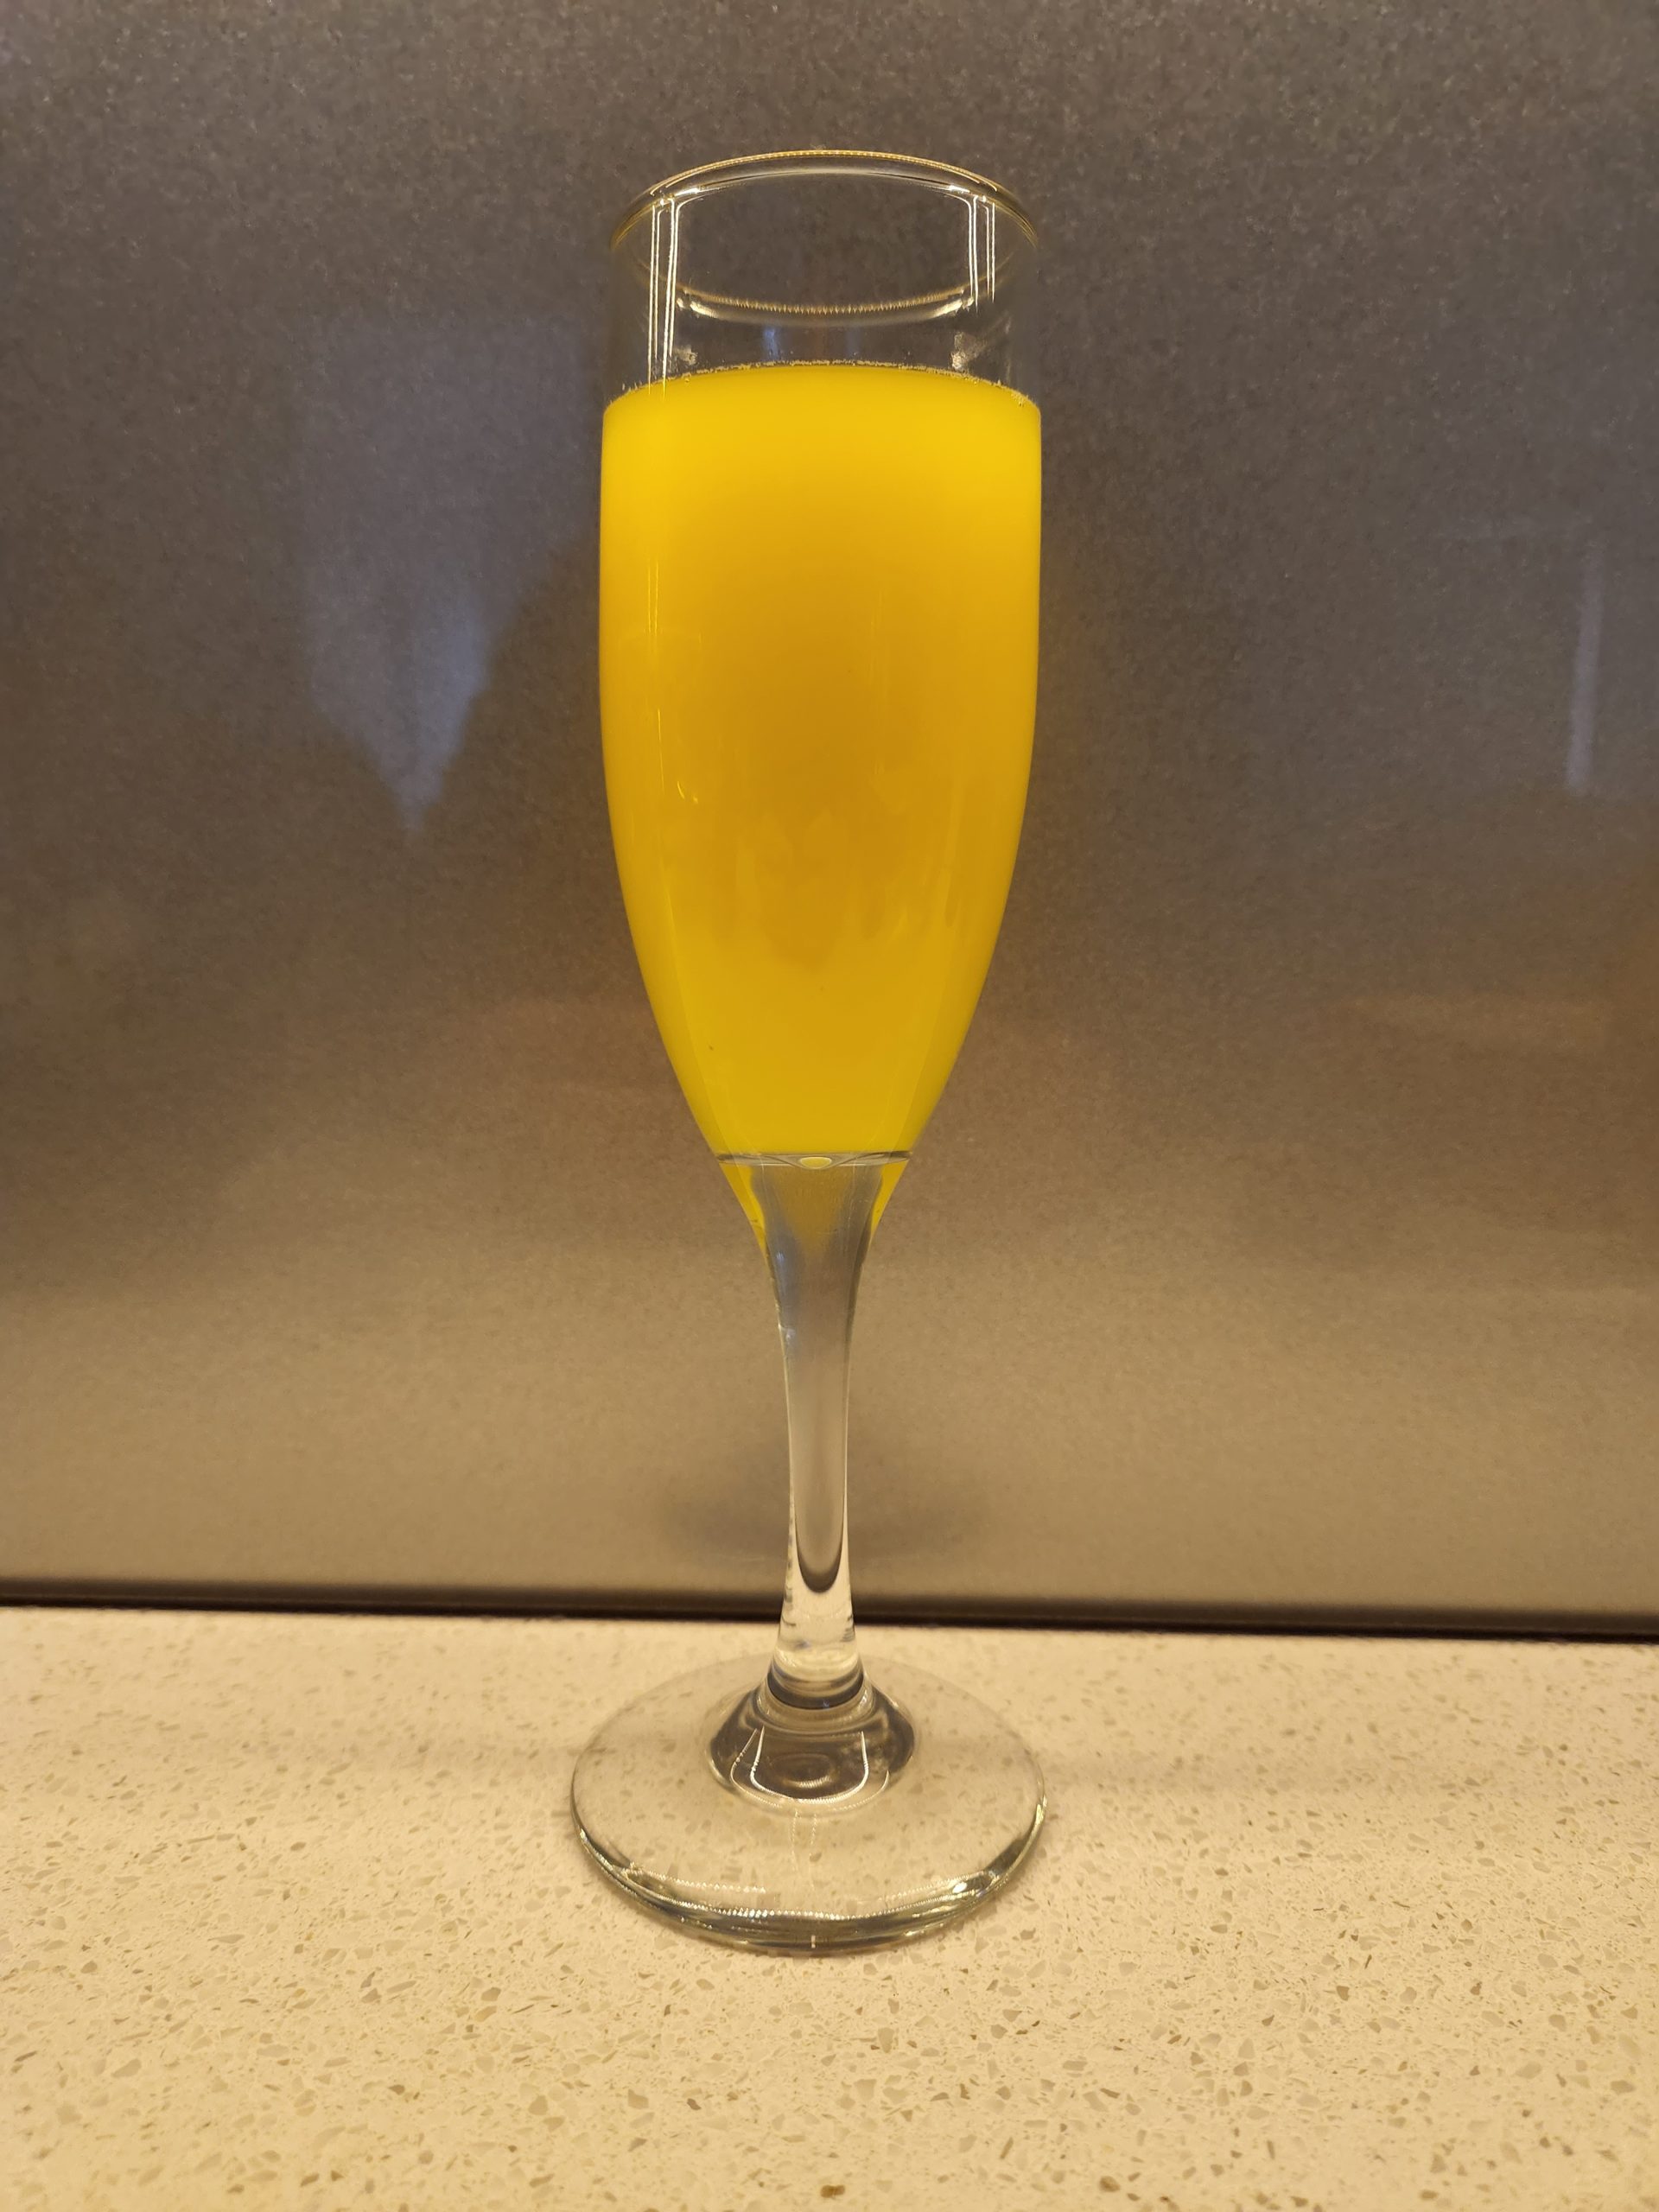 Mimosa Recipe - What Cocktail Can I Make?